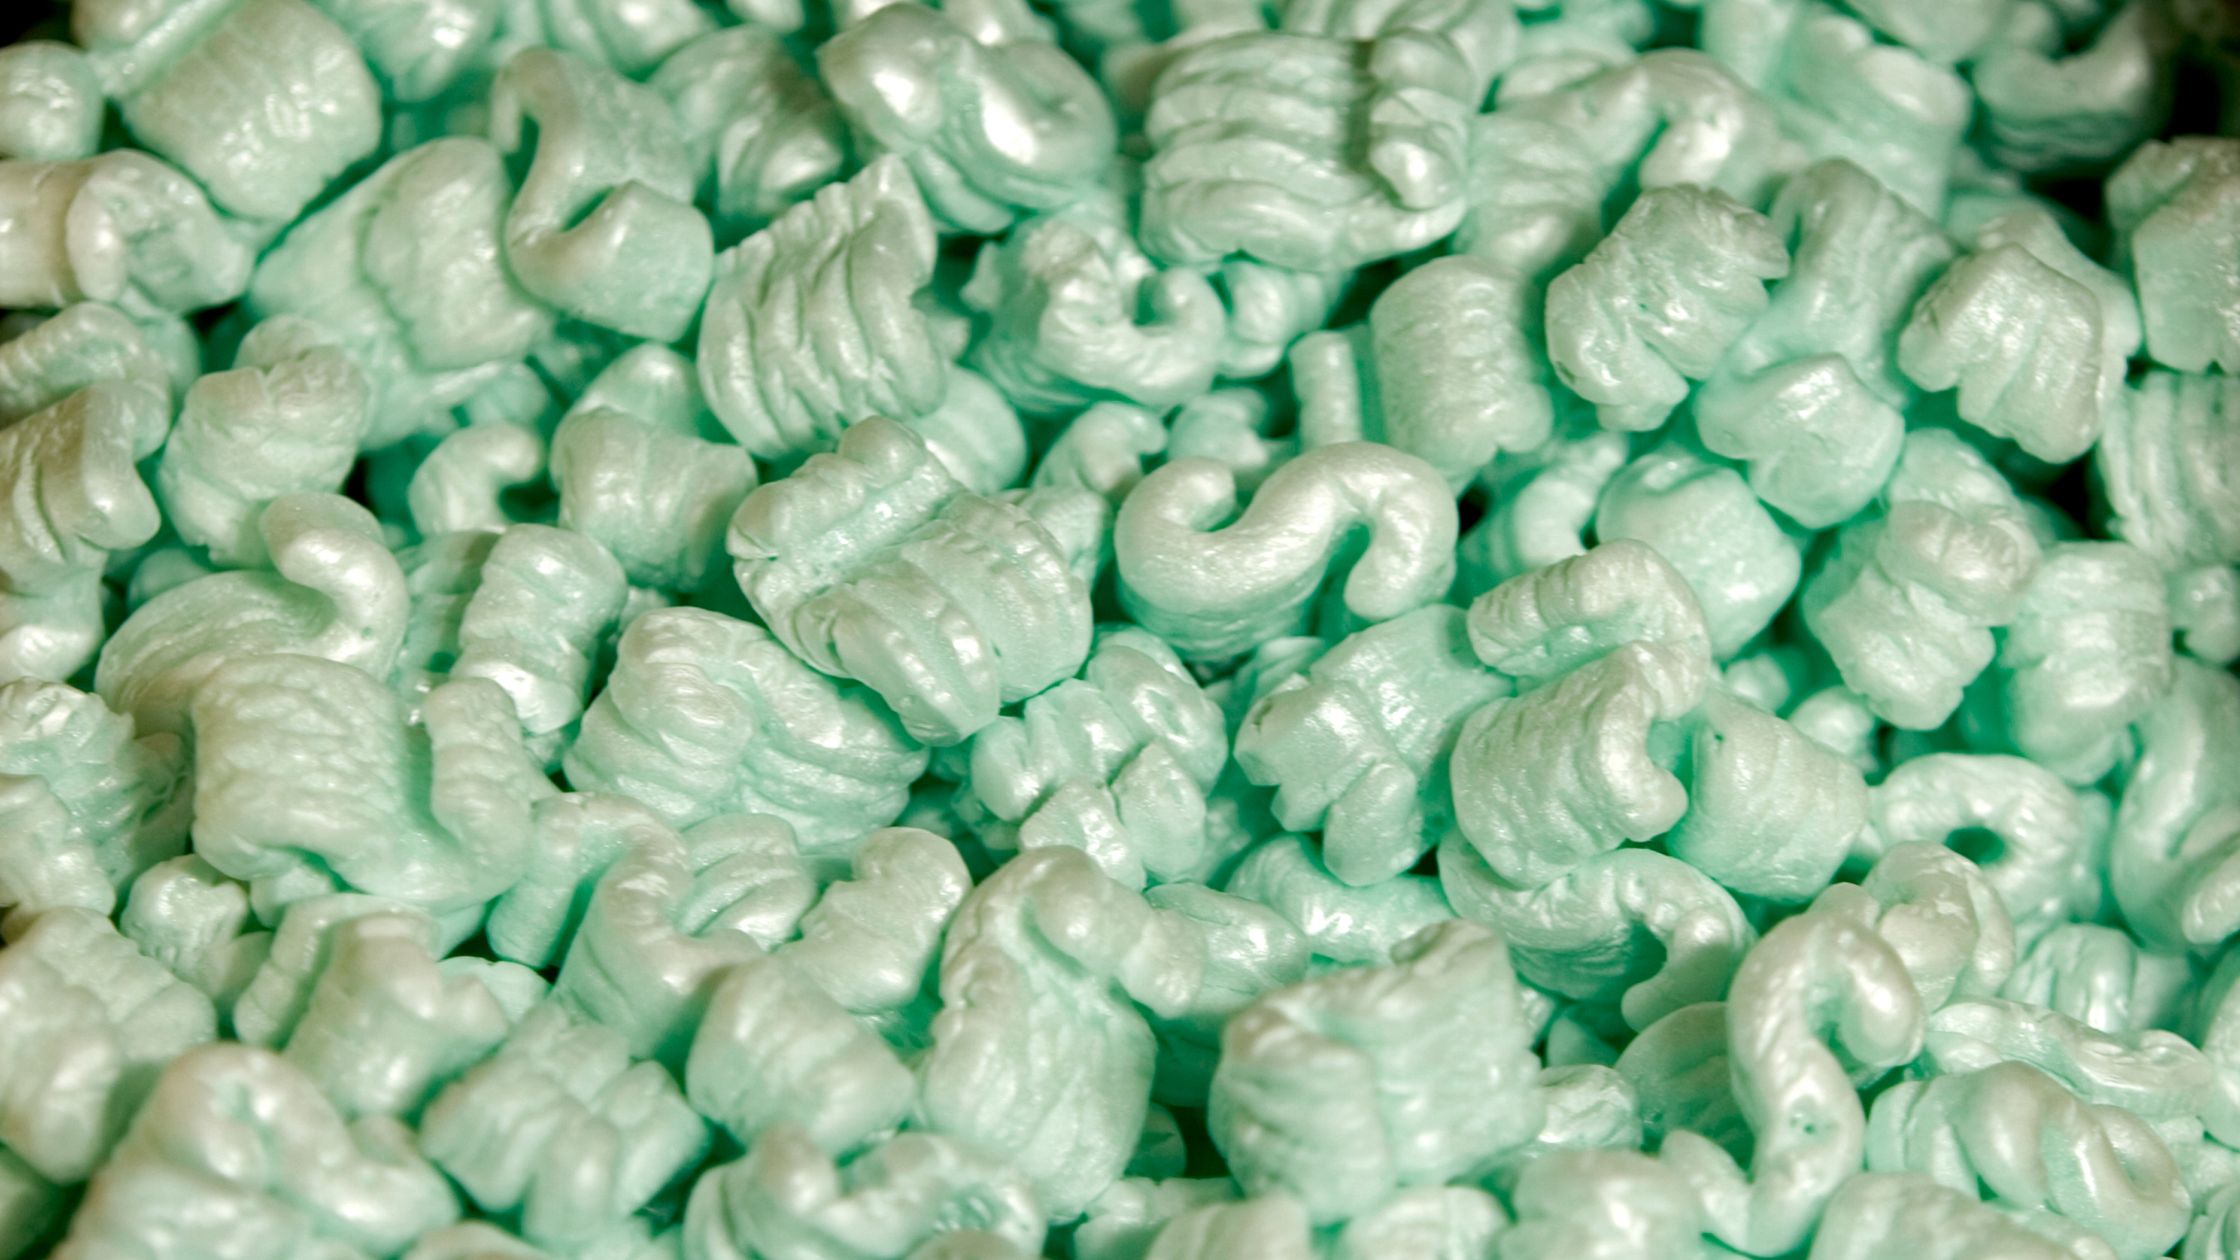 How to Dispose of Biodegradable Packing Peanuts